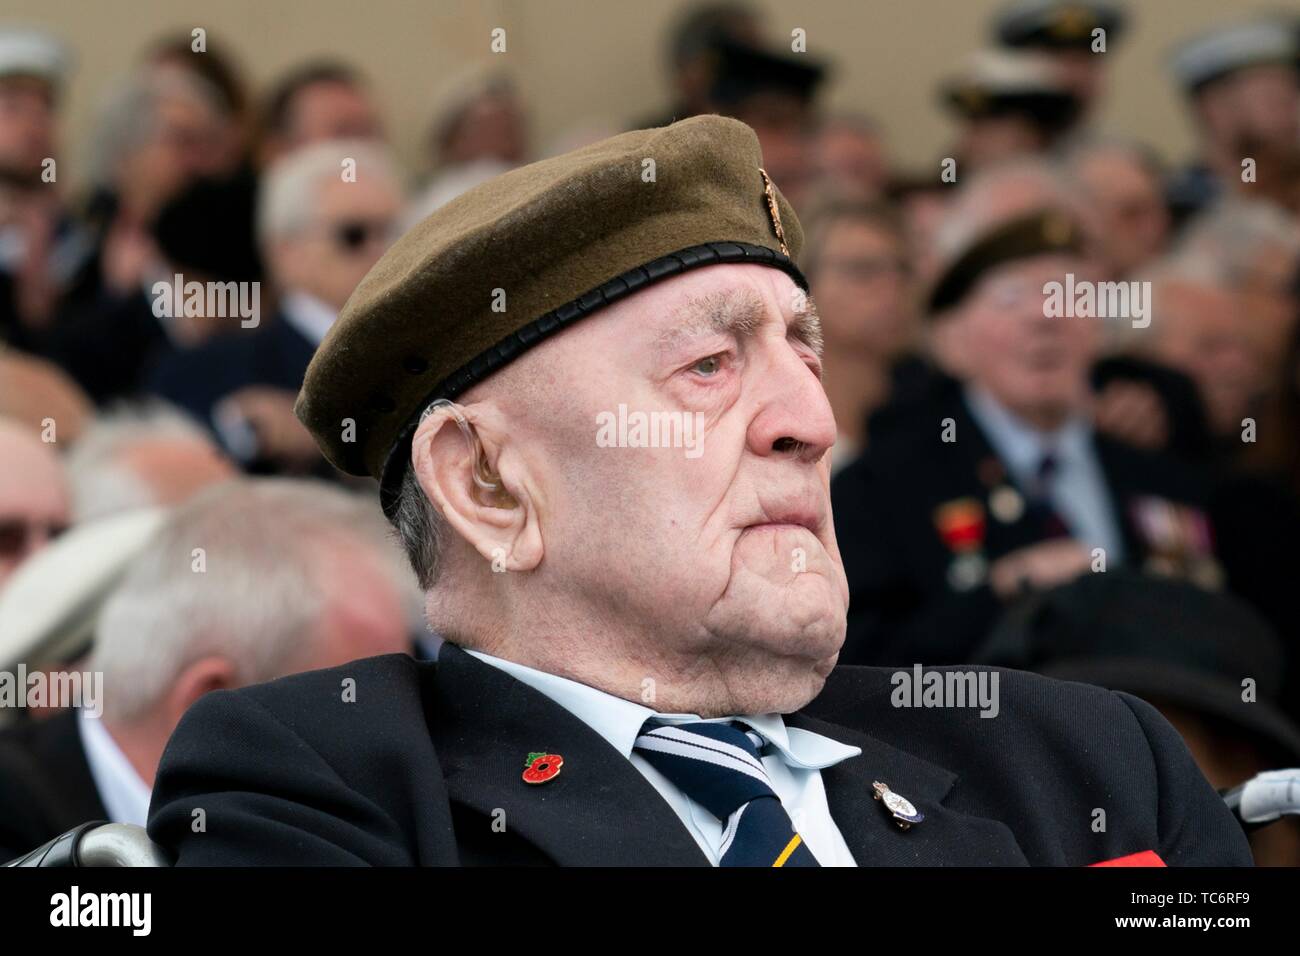 Portsmouth, UK. 05th June, 2019. An elderly World War Two veteran during an event to marking the 75th anniversary of D-Day at the Southsea Common June 5, 2019 in Portsmouth, England. World leaders gathered on the south coast of England where troops departed for the D-Day assault 75-years-ago. Credit: Planetpix/Alamy Live News Stock Photo